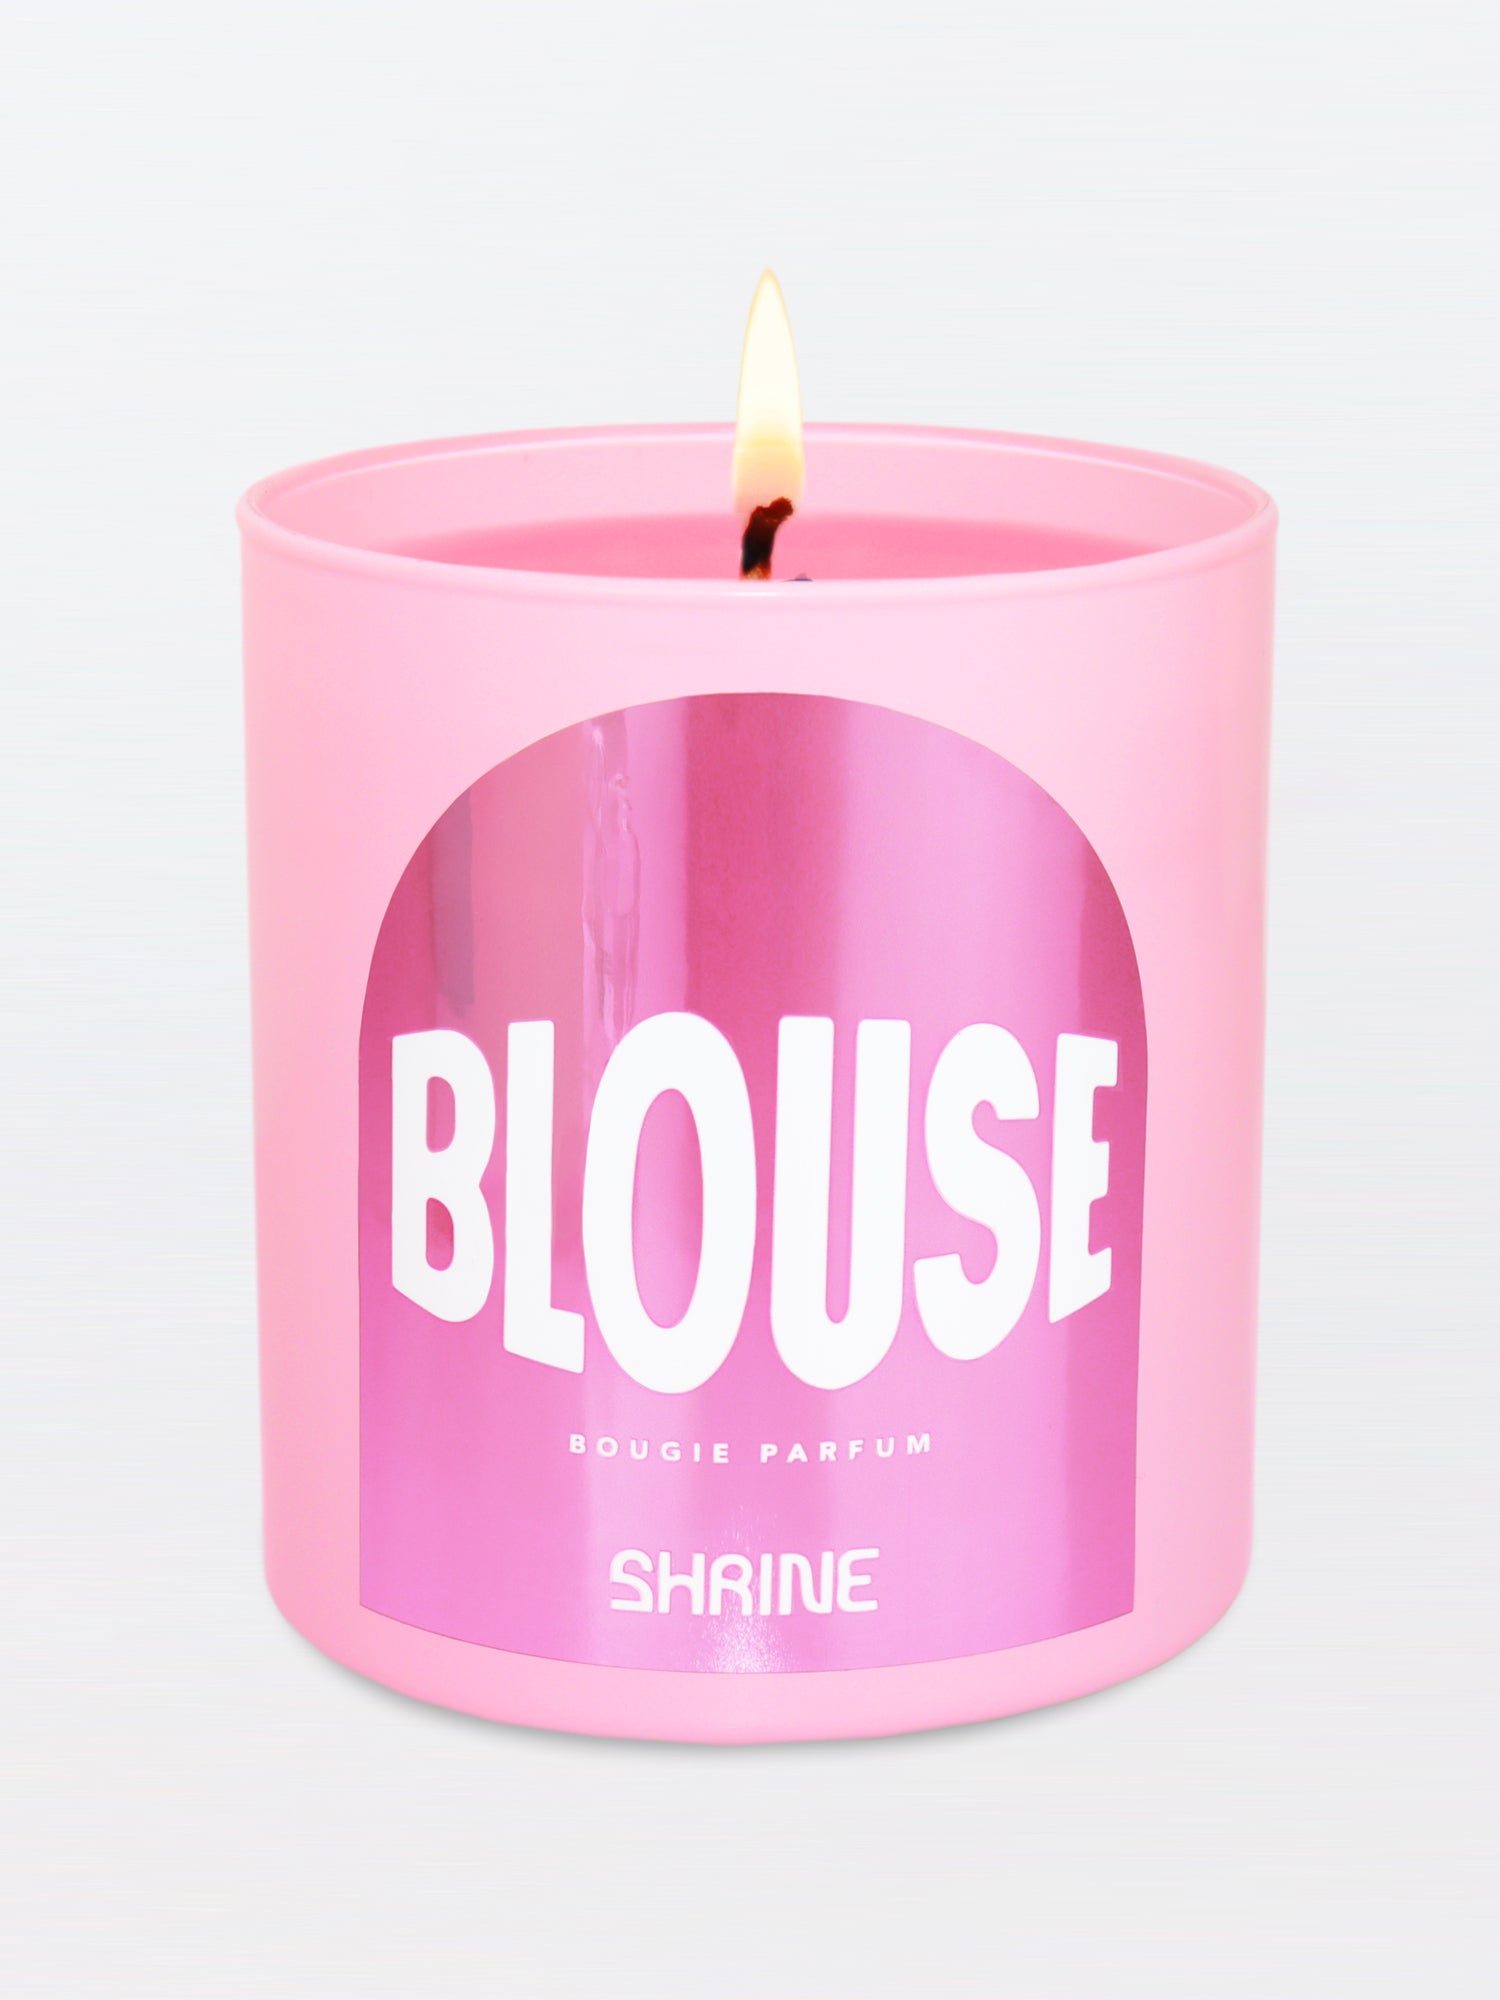 shrine blouse pale pink light pink scented candle with metallic pink label floral candle magazine candle musk candle pink peppercorn candle satin candle shop shrine shopshrine